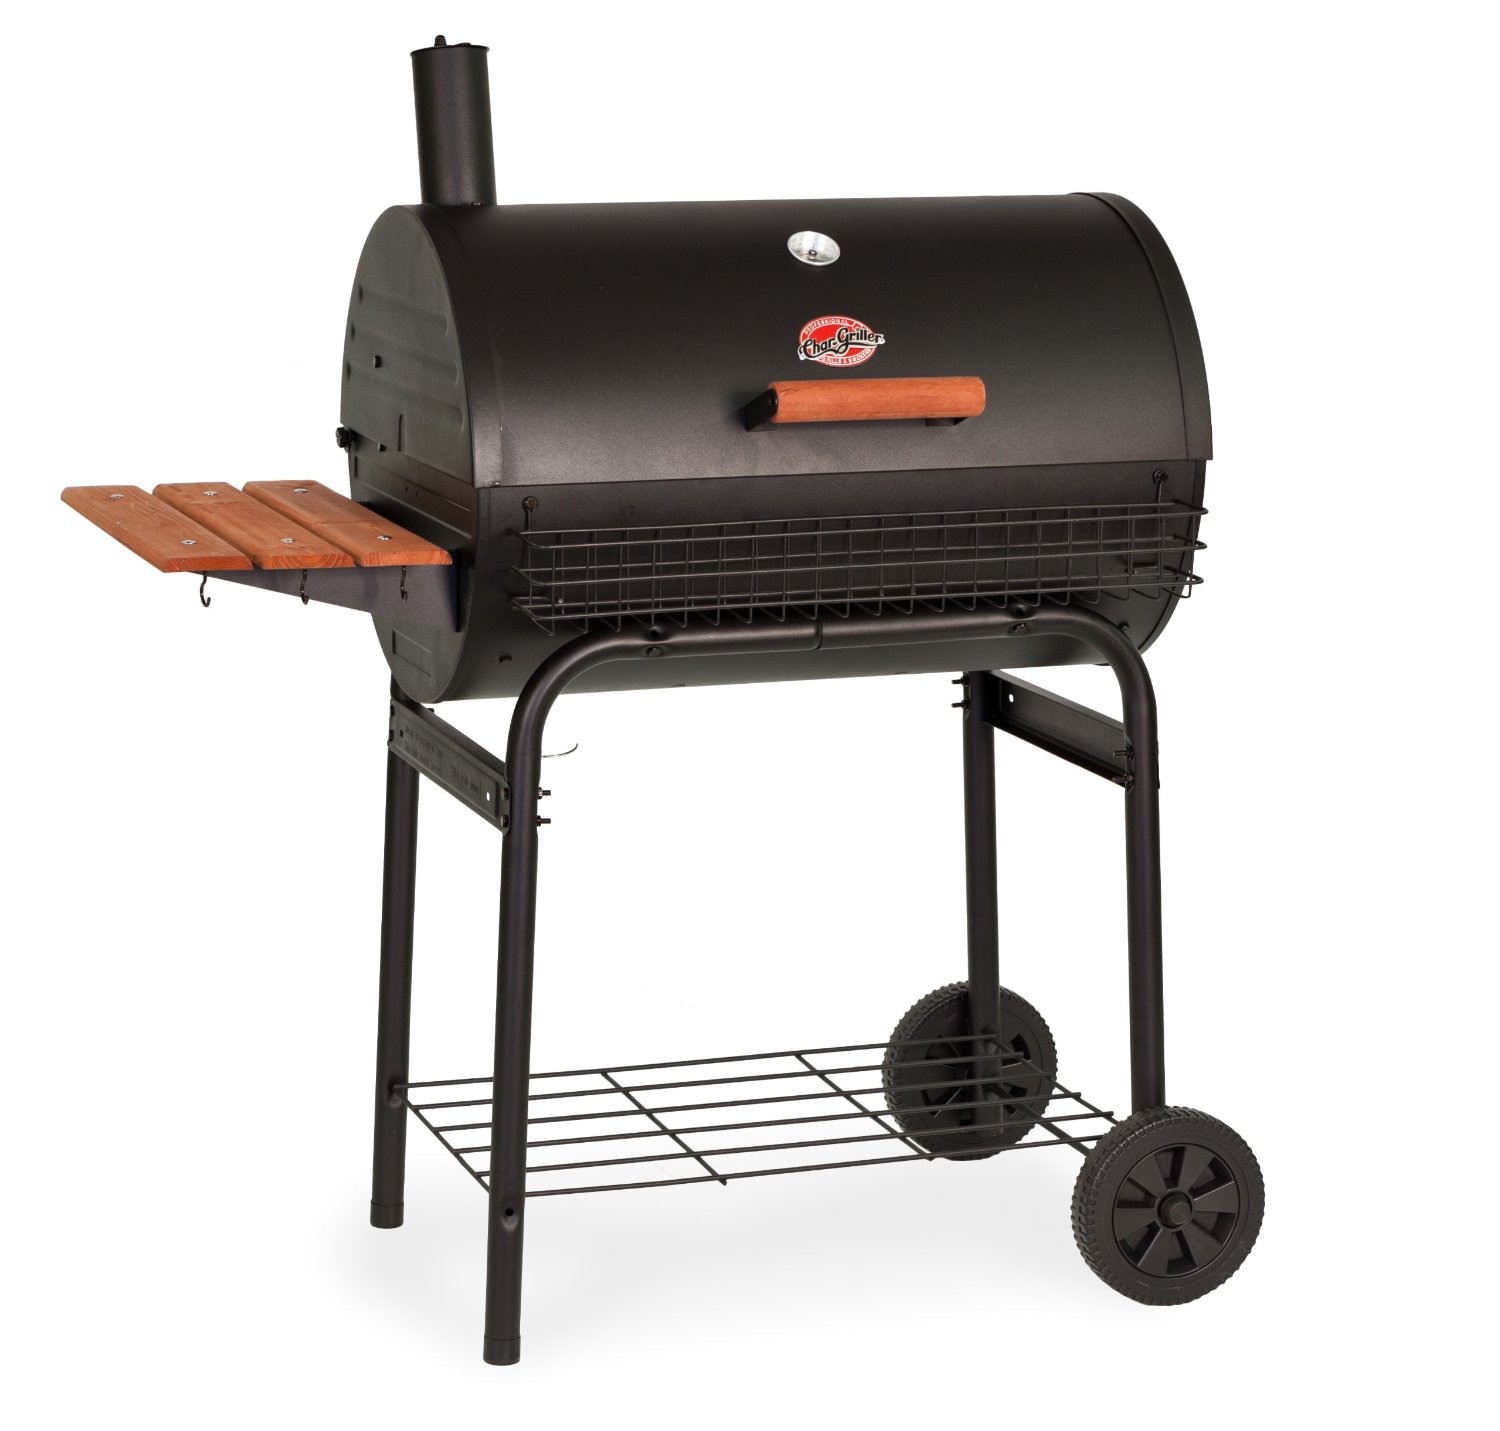 Top 3 Best Charcoal Grills About Outdoor Grilling